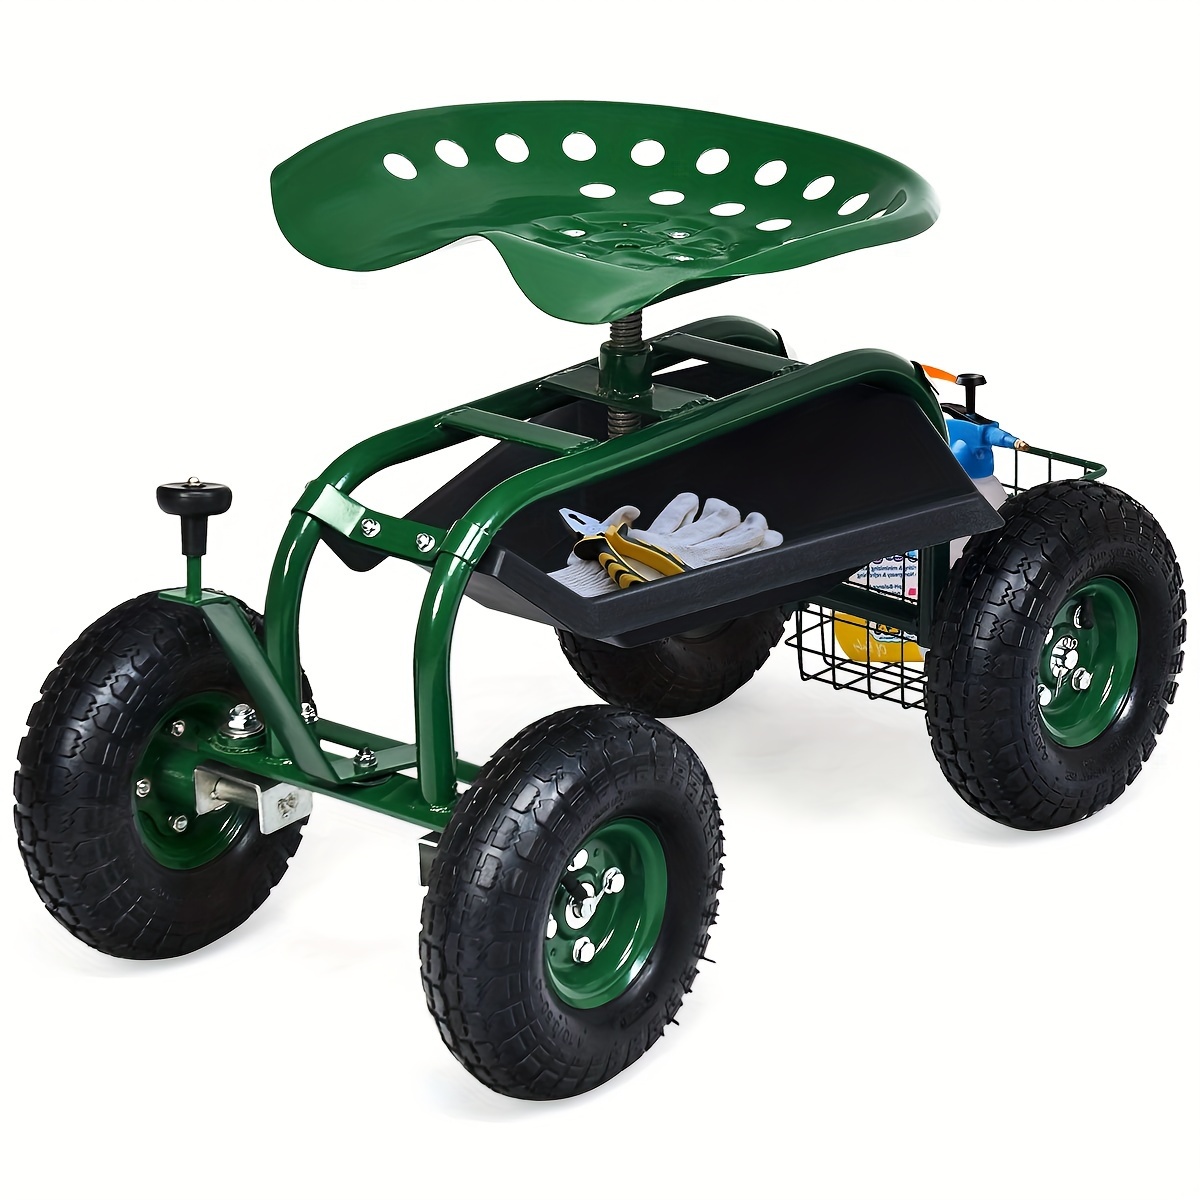 

1pc Goplus Garden Cart Gardening Workseat W/wheels, Patio Wagon Scooter For Planting, Work Seat With Tool Tray And Basket